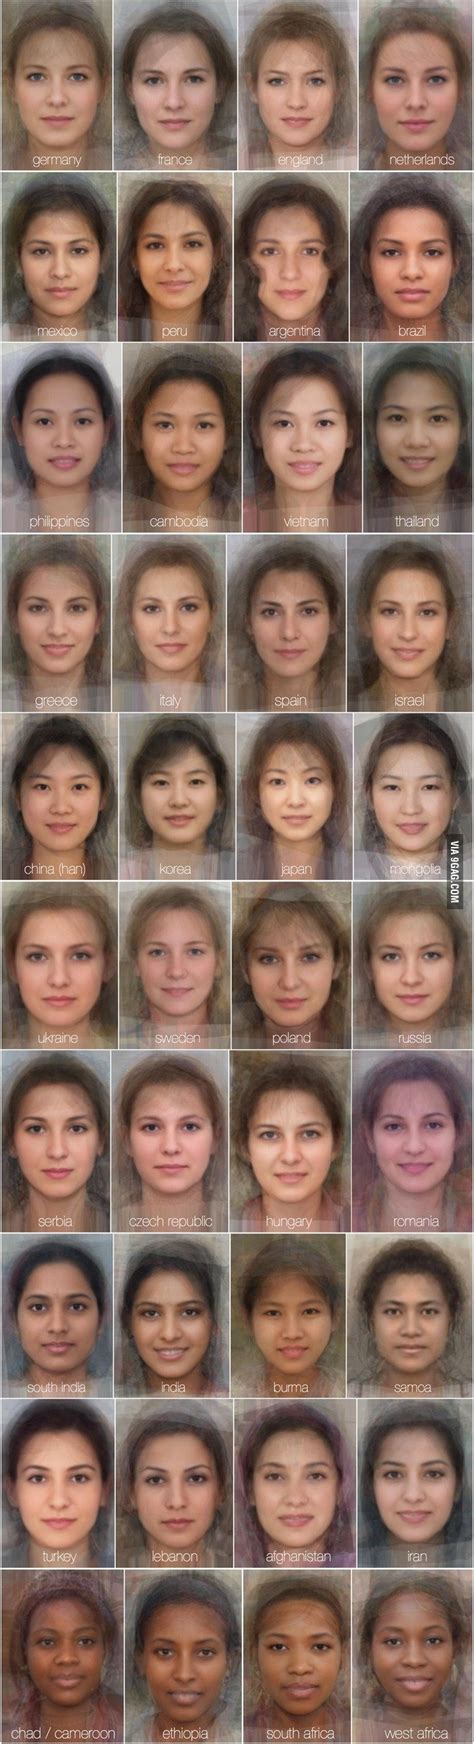 Average Faces Of Women In Countries Around The World Petapixel